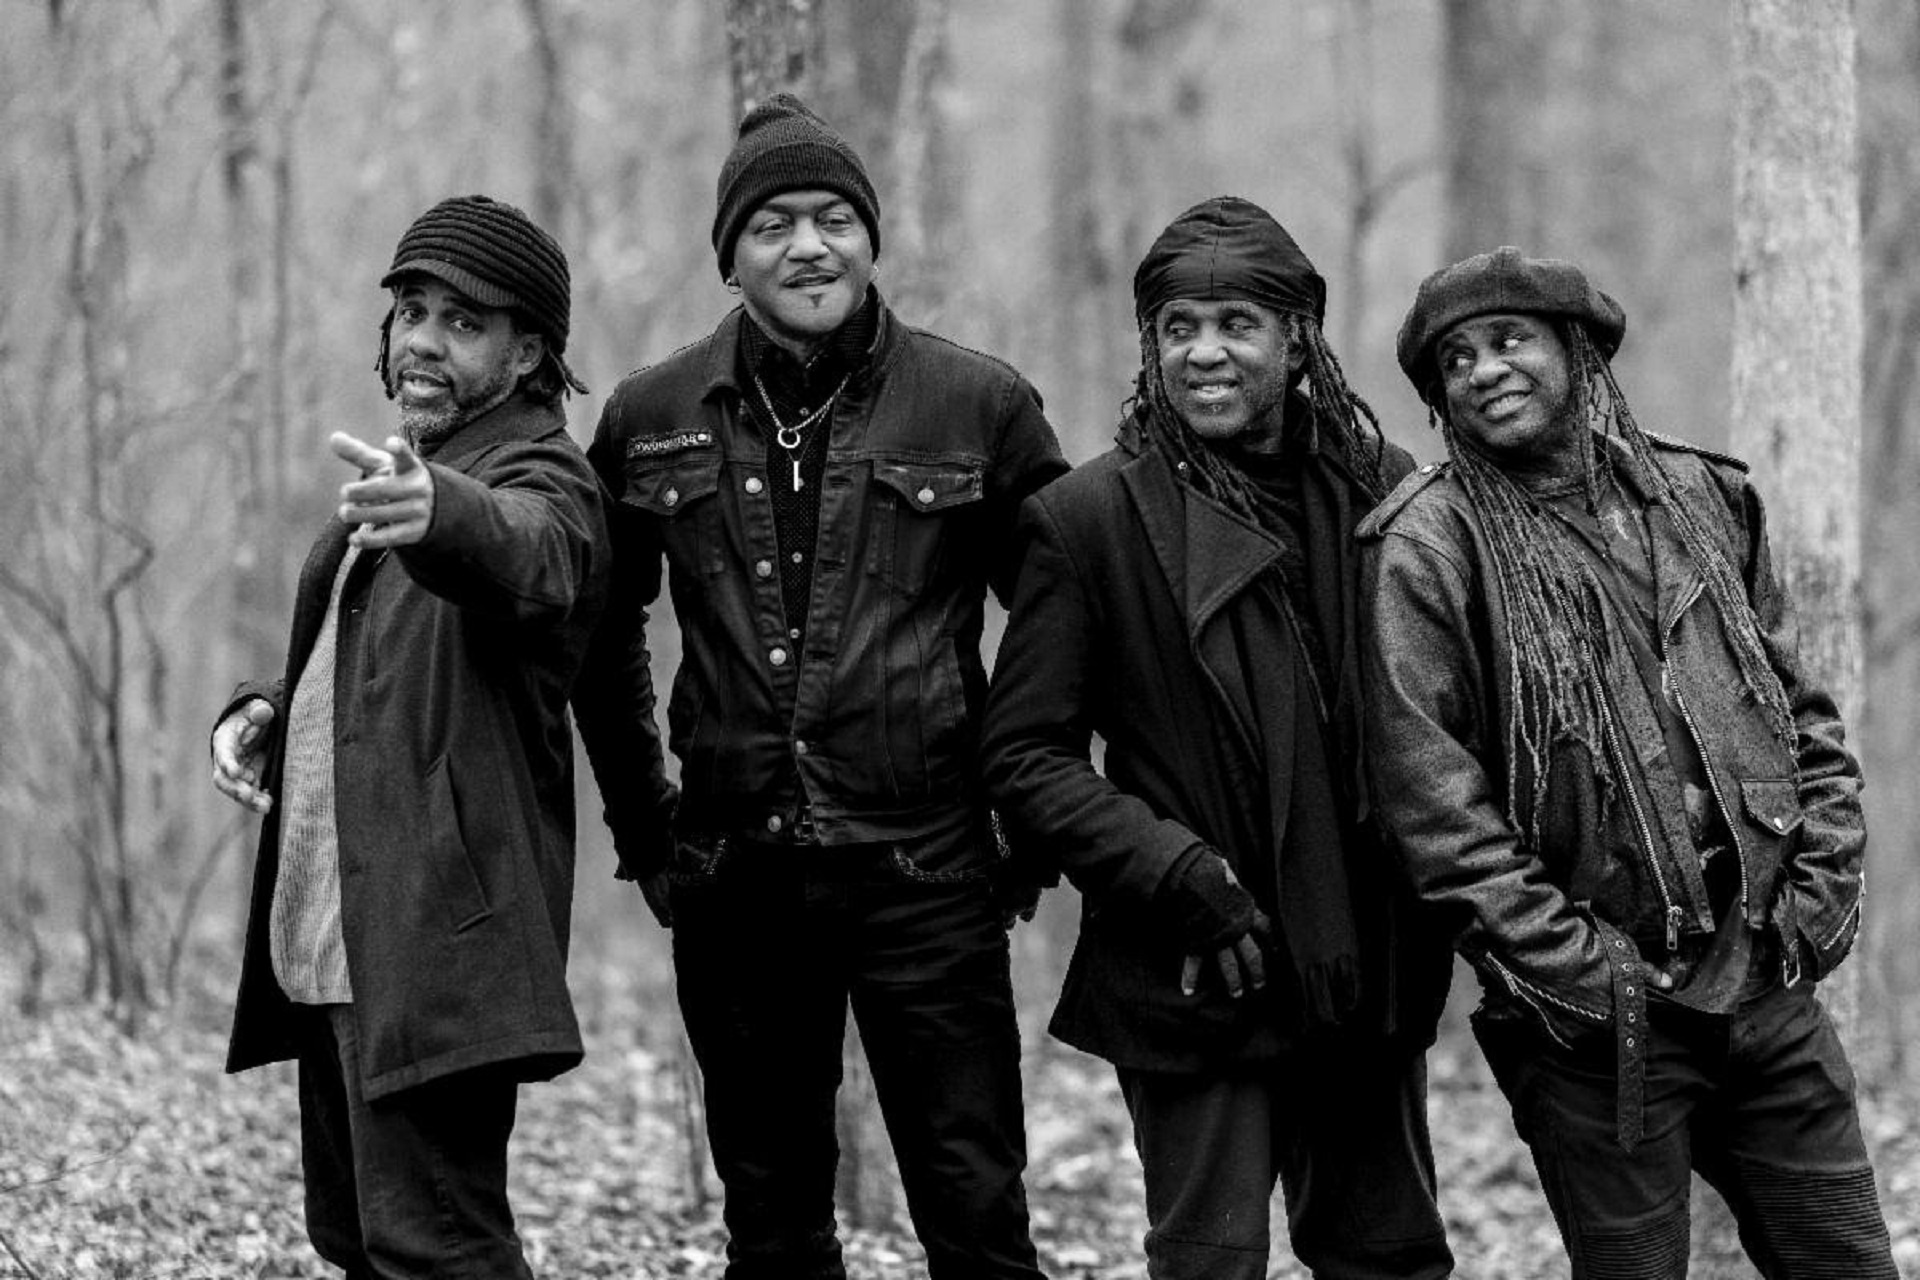 VICTOR WOOTEN AND THE WOOTEN BROTHERS Expand Fall Tour, With Stops in St. Louis, Nashville, Indianapolis, and More